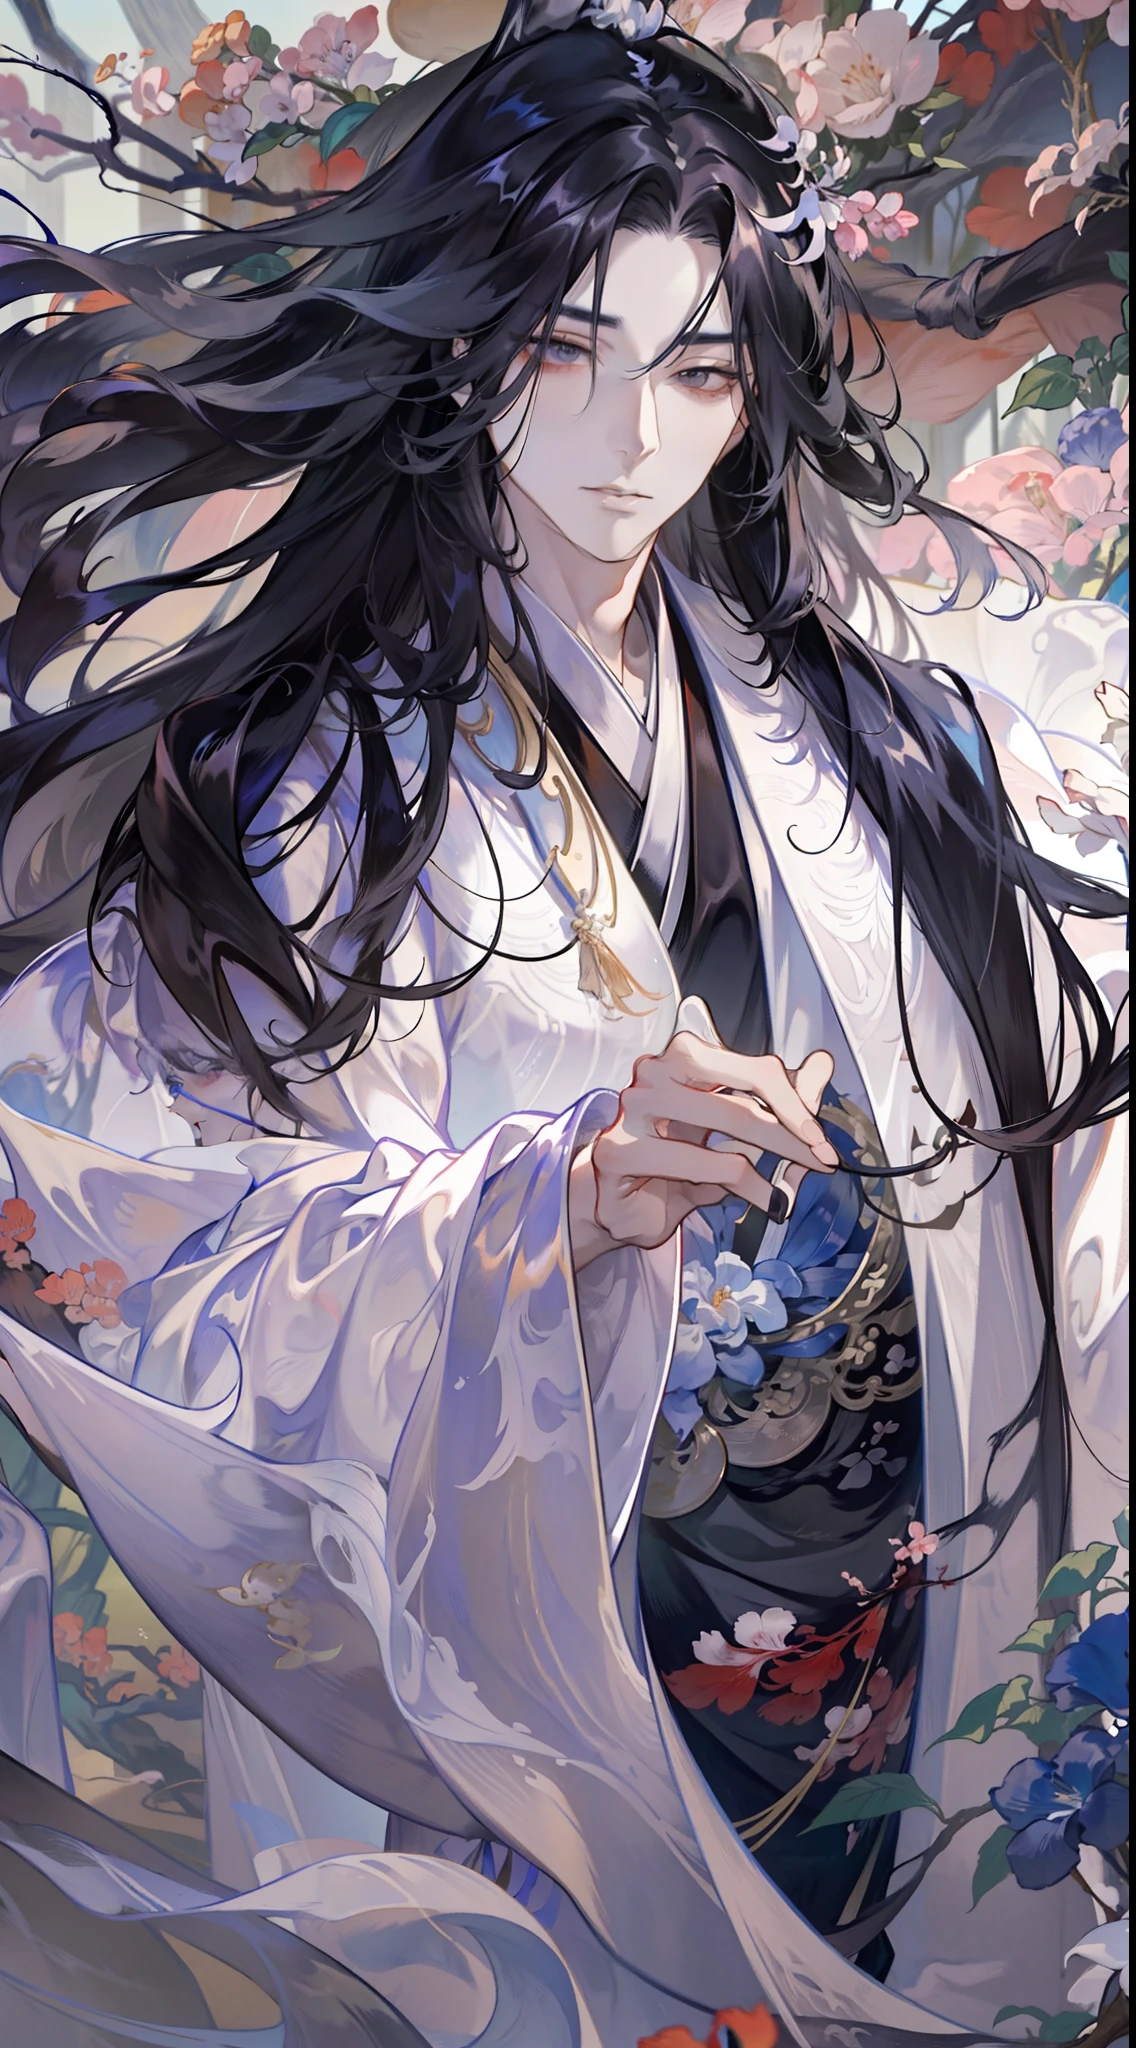 Anime characters with black hair and white horses, flowing hair and long robes, heise jinyao, beautiful male god of death, handsome guy in demon killer art, onmyoji portrait, Inspired by Seki Dosheng, by Yang J, zhao yun, Beautiful androgynous prince, Inspired by Bian Shoumin, Flowing white robe